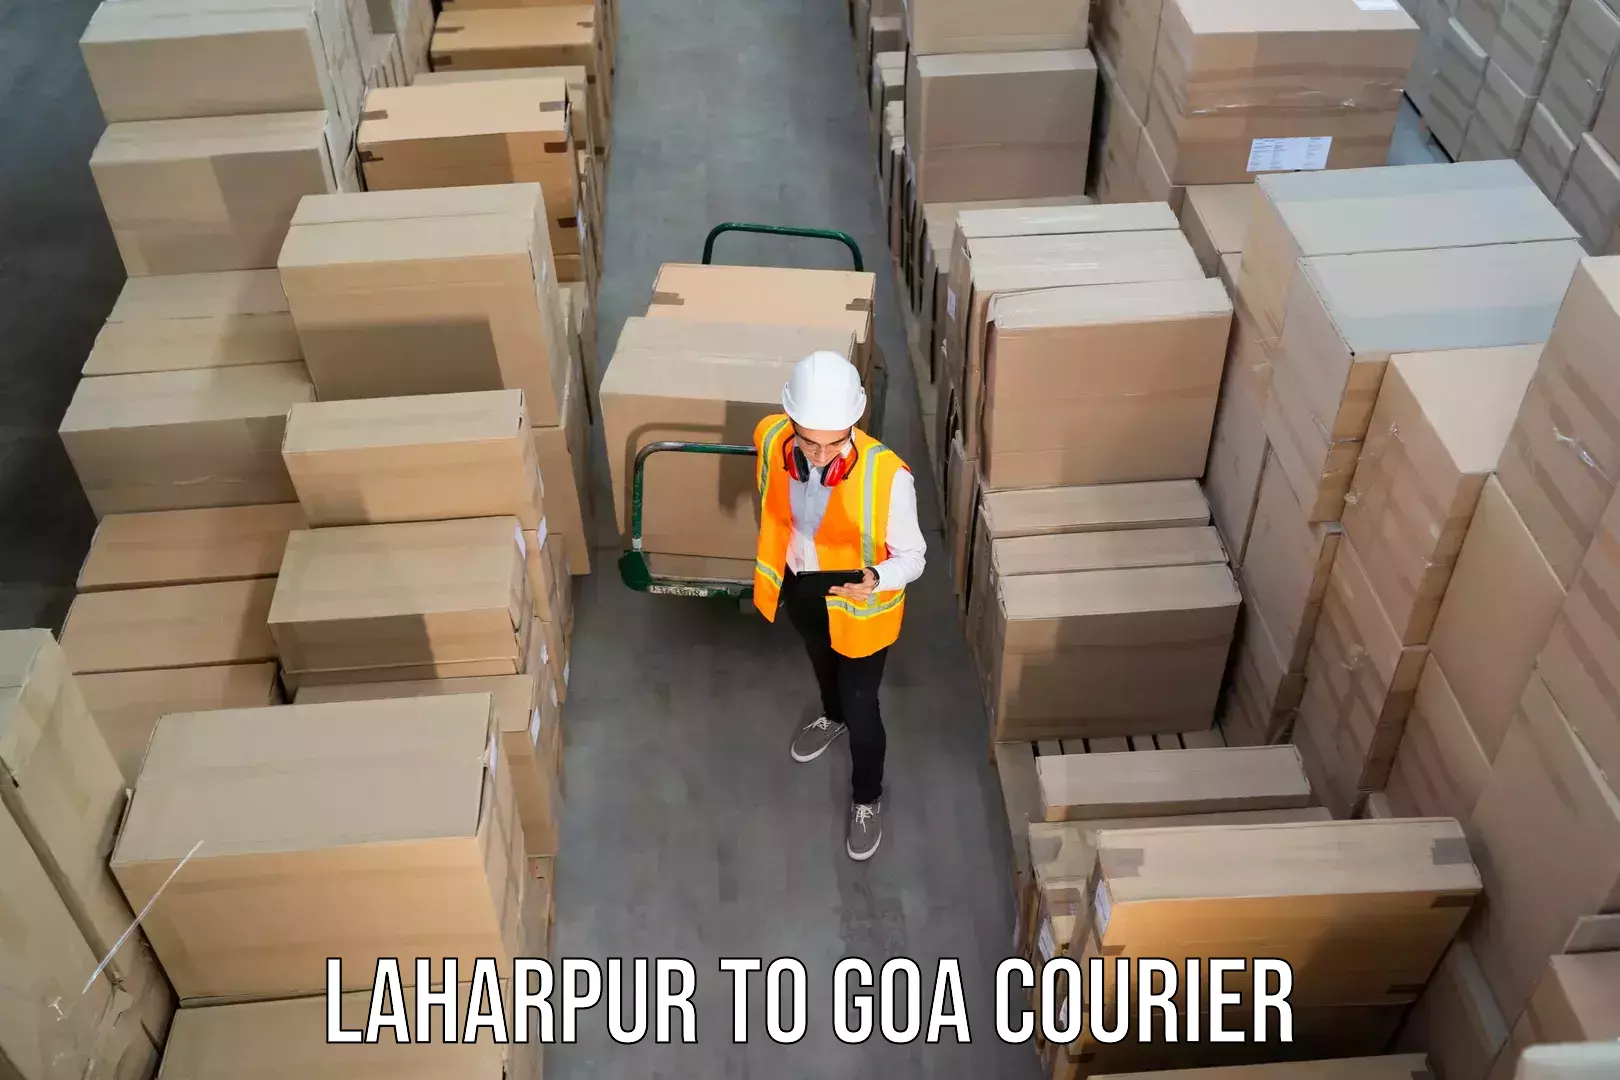 Nationwide courier service Laharpur to Bardez